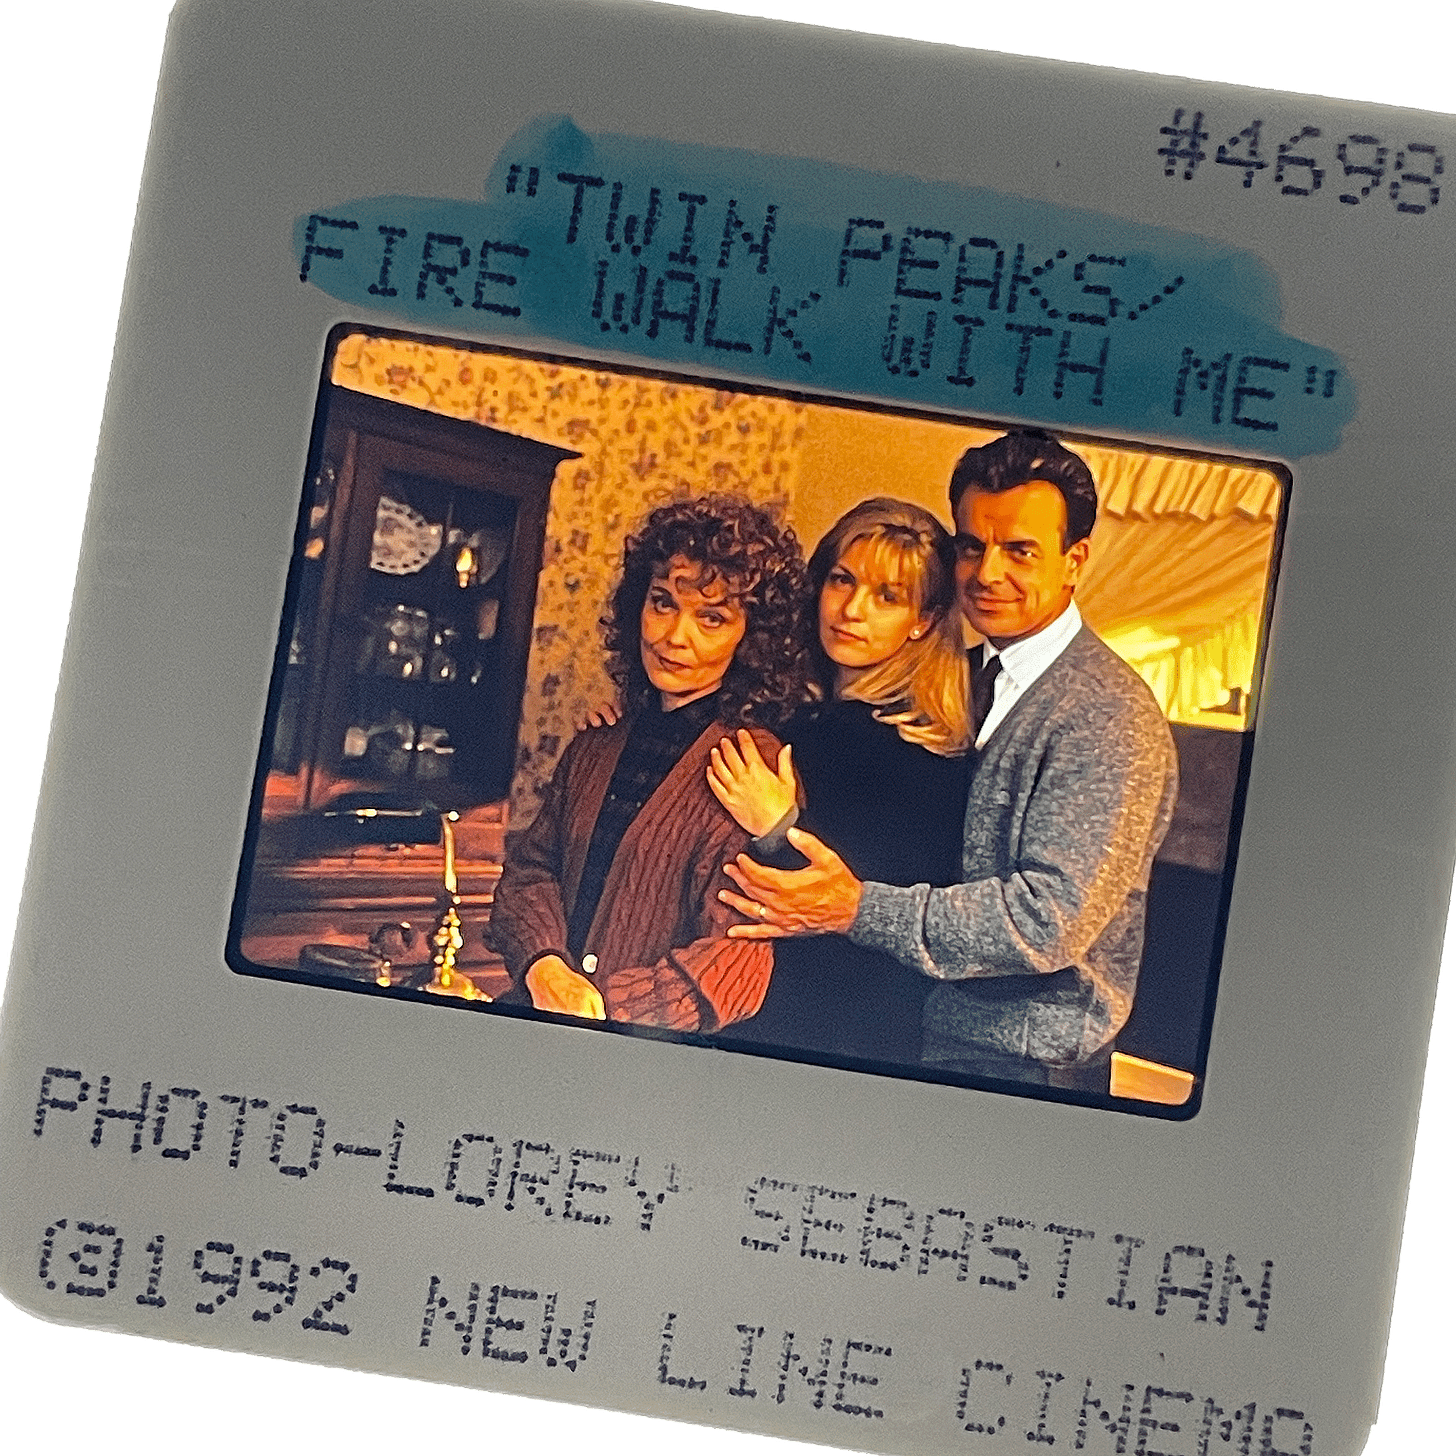 A color slide from Twin Peaks: Fire Walk With Me, taken by Lorey Sebastian. Shows Grace Zabriskie, Sheryl Lee and Ray Wise posed for a normal suburban family portrait.